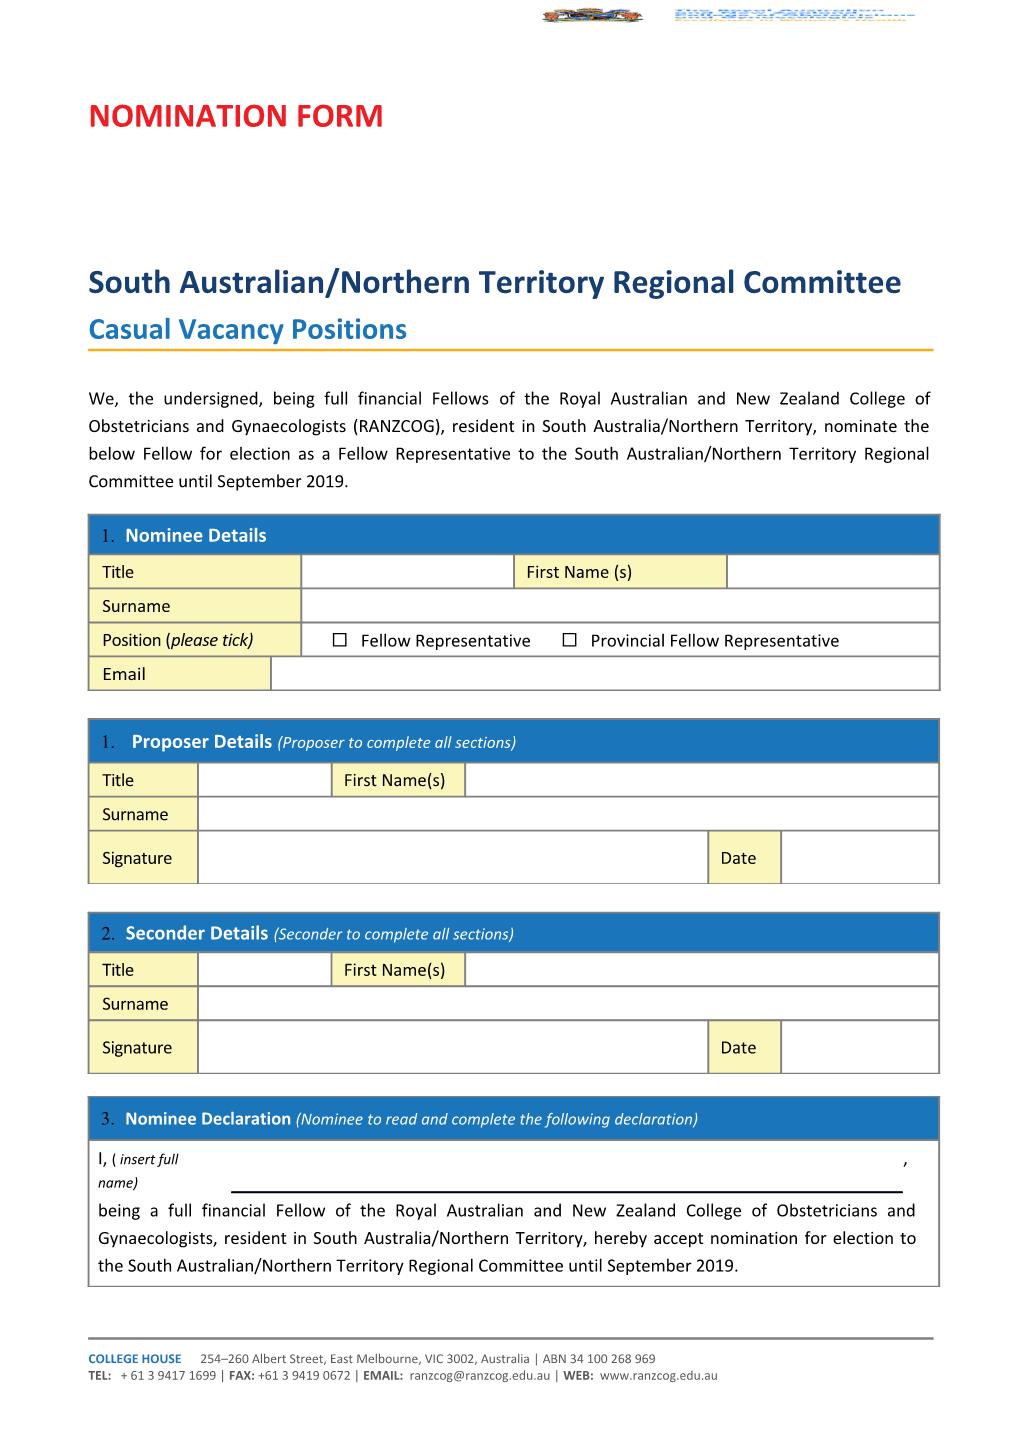 South Australian/Northern Territoryregional Committee Casual Vacancy Positions